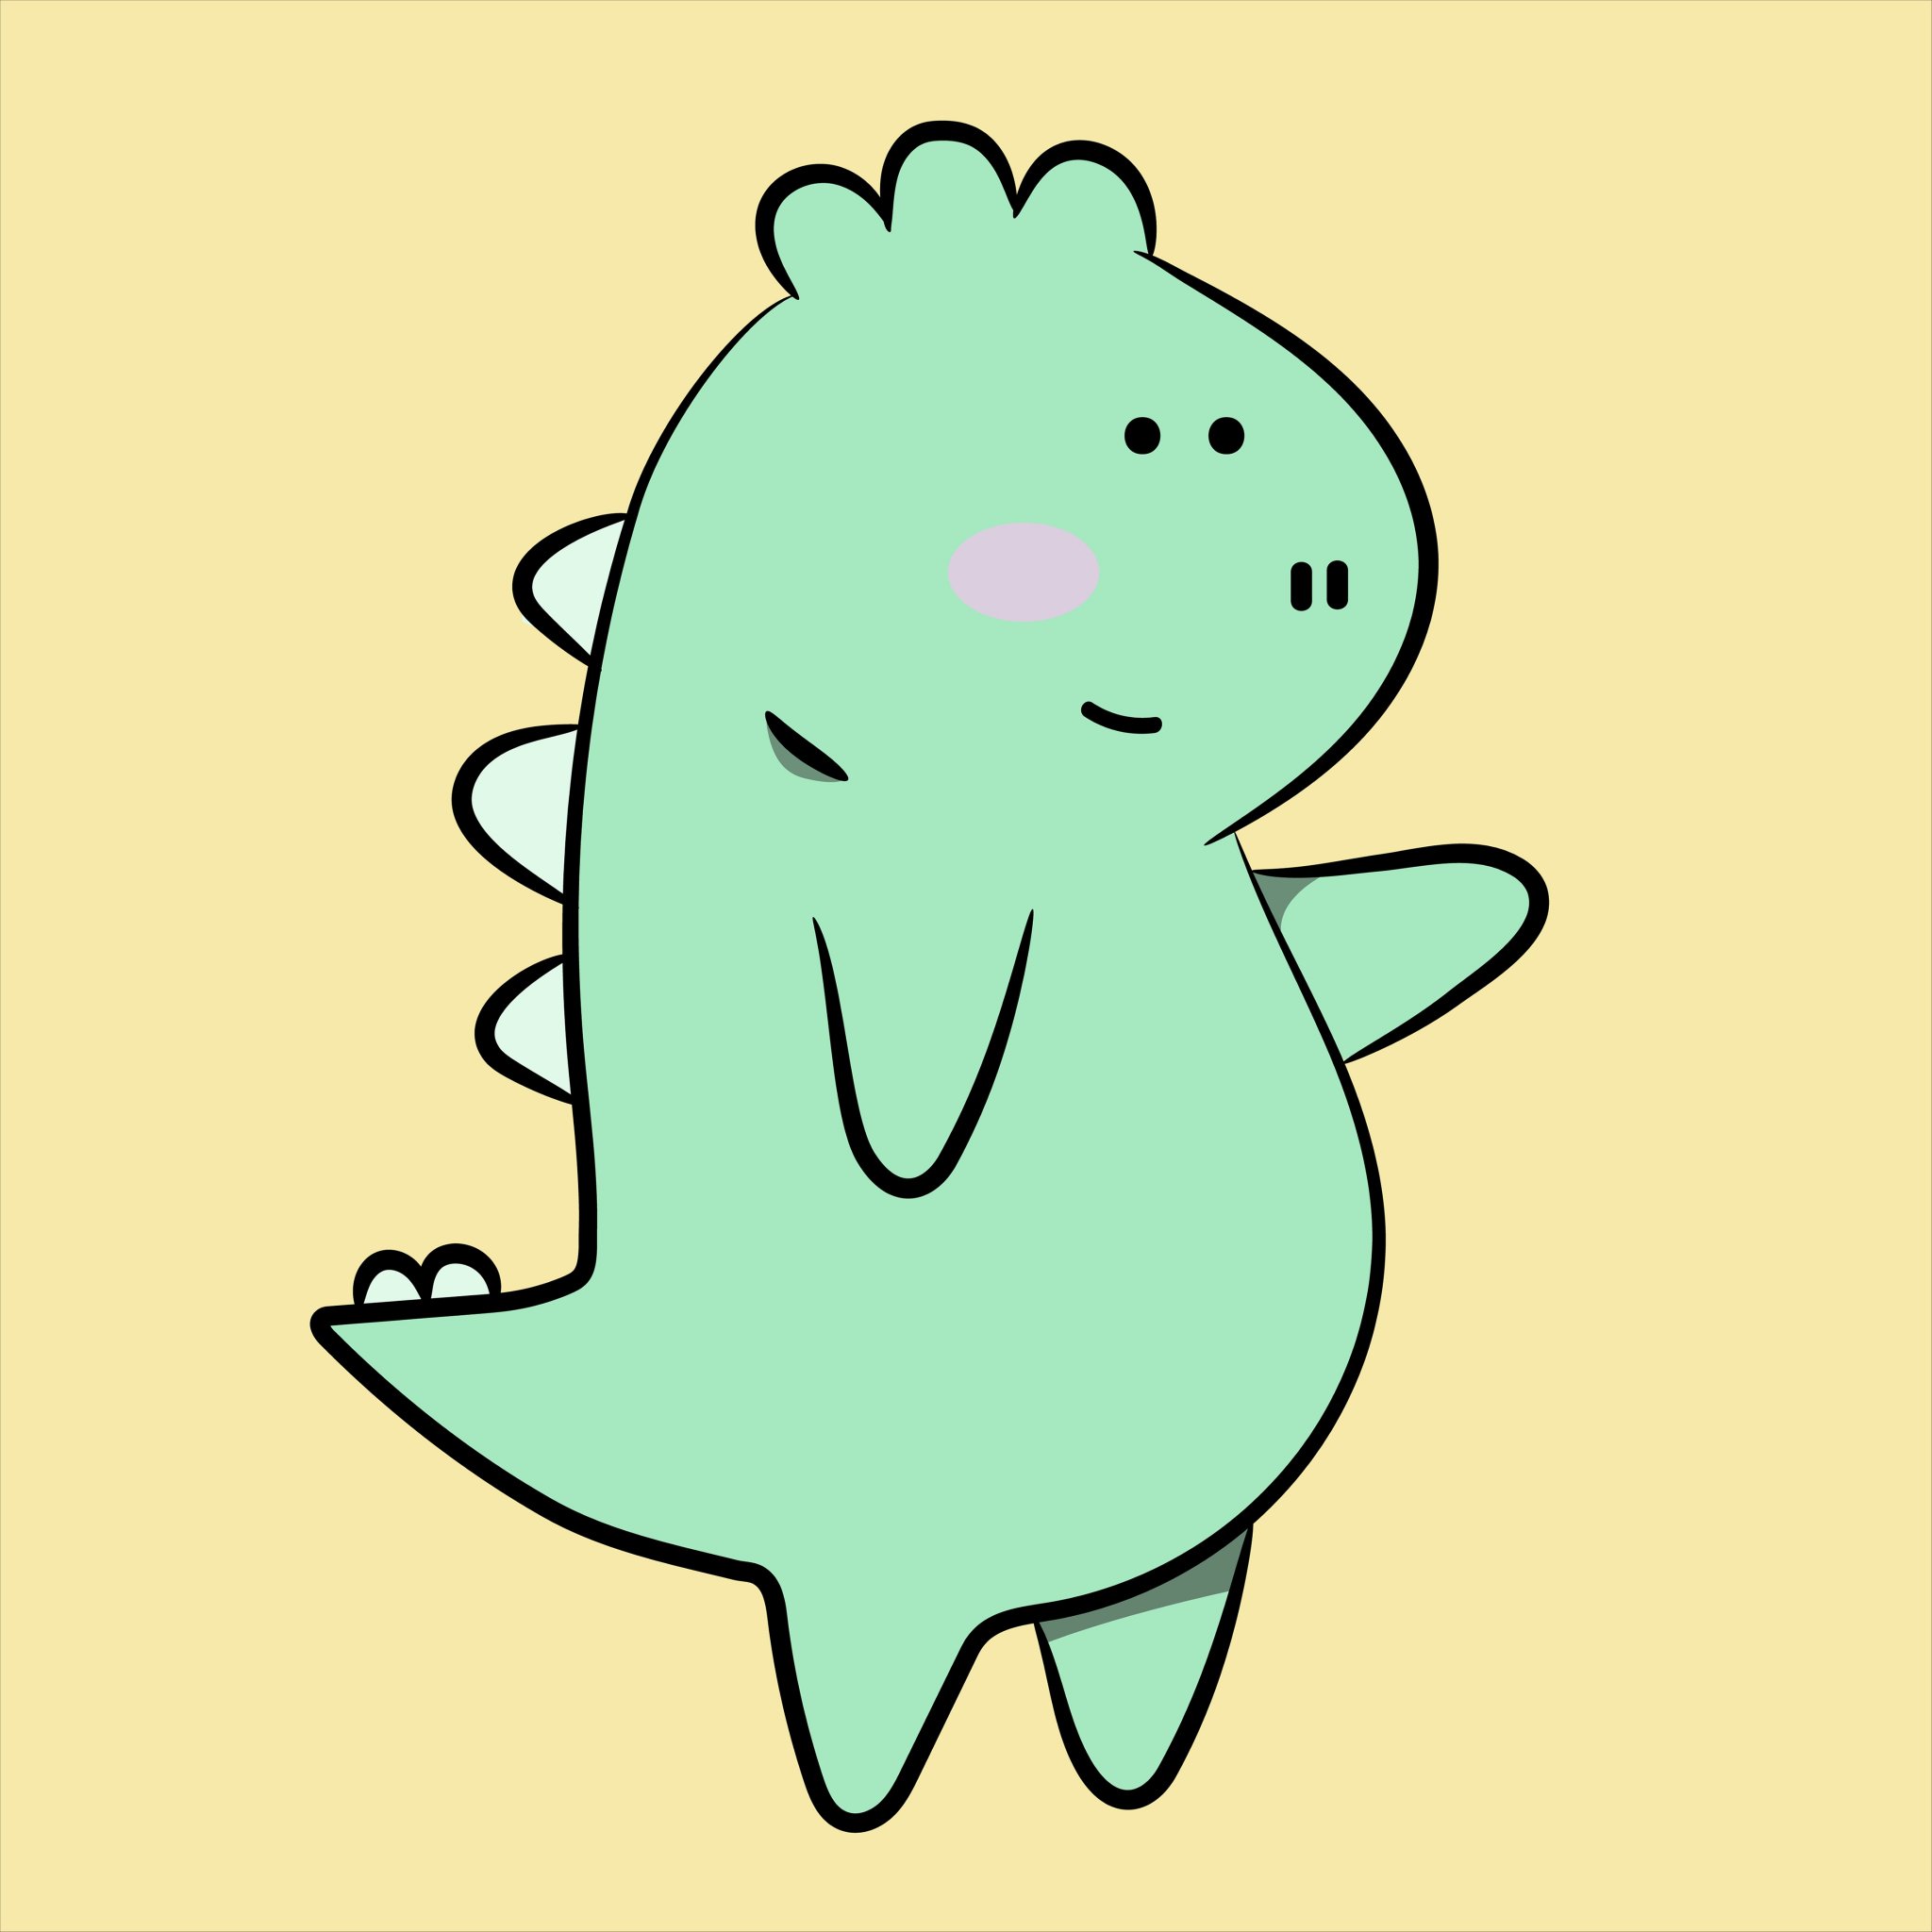 🌸Just a lil' dinosaur with an ice cream tummy🌸 
I love snacks, video games, cartoons, and being kind 💖